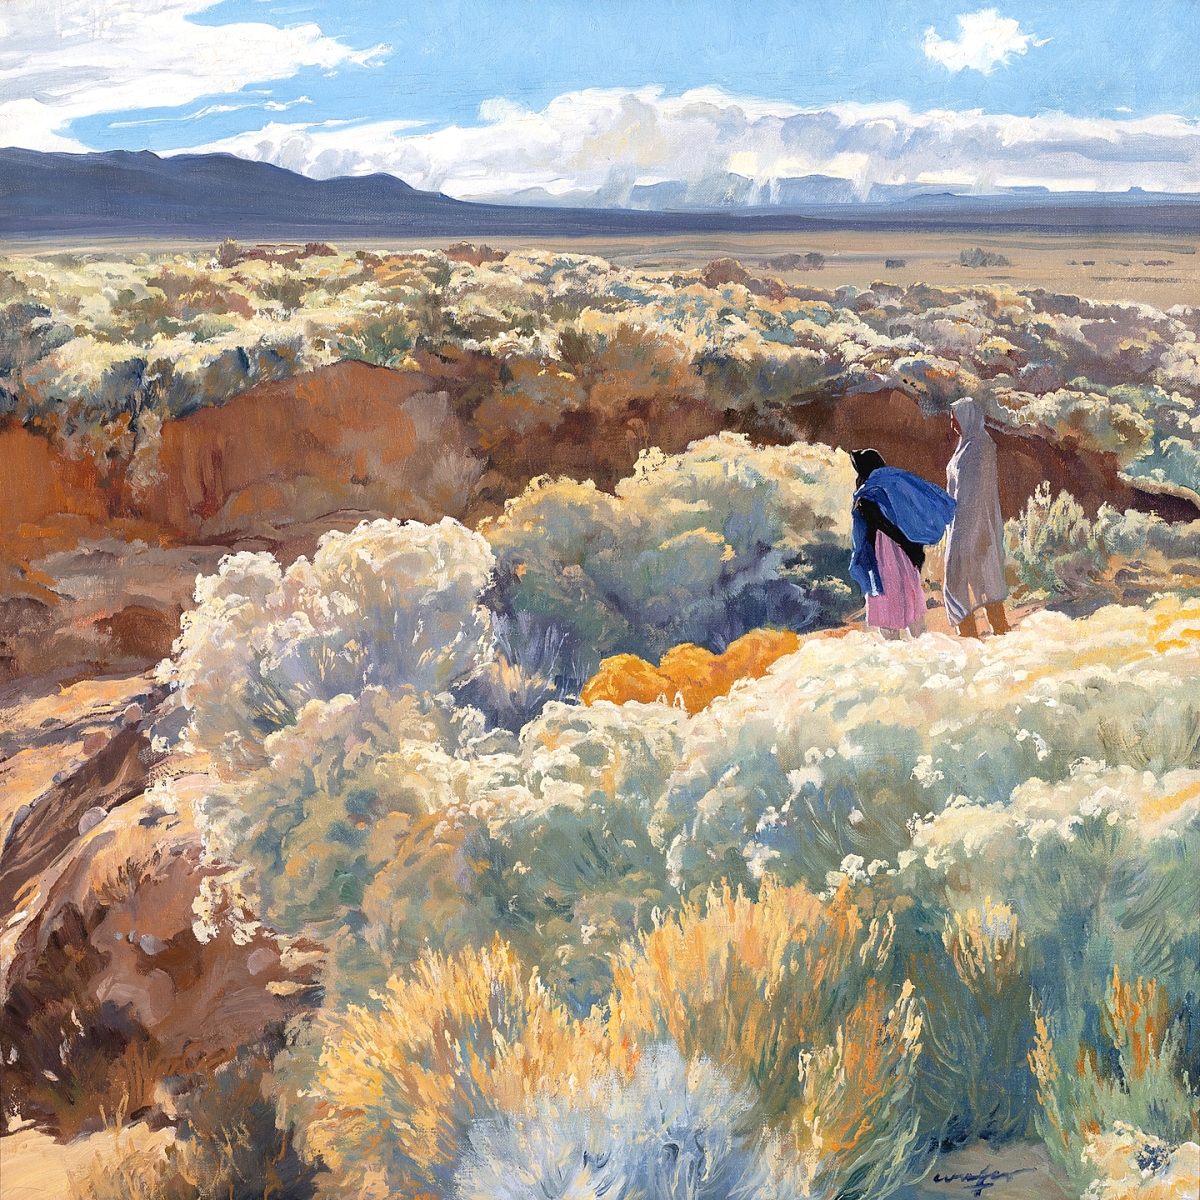 “I’d put it up against any landscape he has ever done,” Mike Overby said regarding “Greasewood and Sage,” a 25-by-25-inch oil on canvas by Walter Ufer that sold for $665,500. Overby said Ufer produced the fewest works of any early Taos artist, making them quite rare.